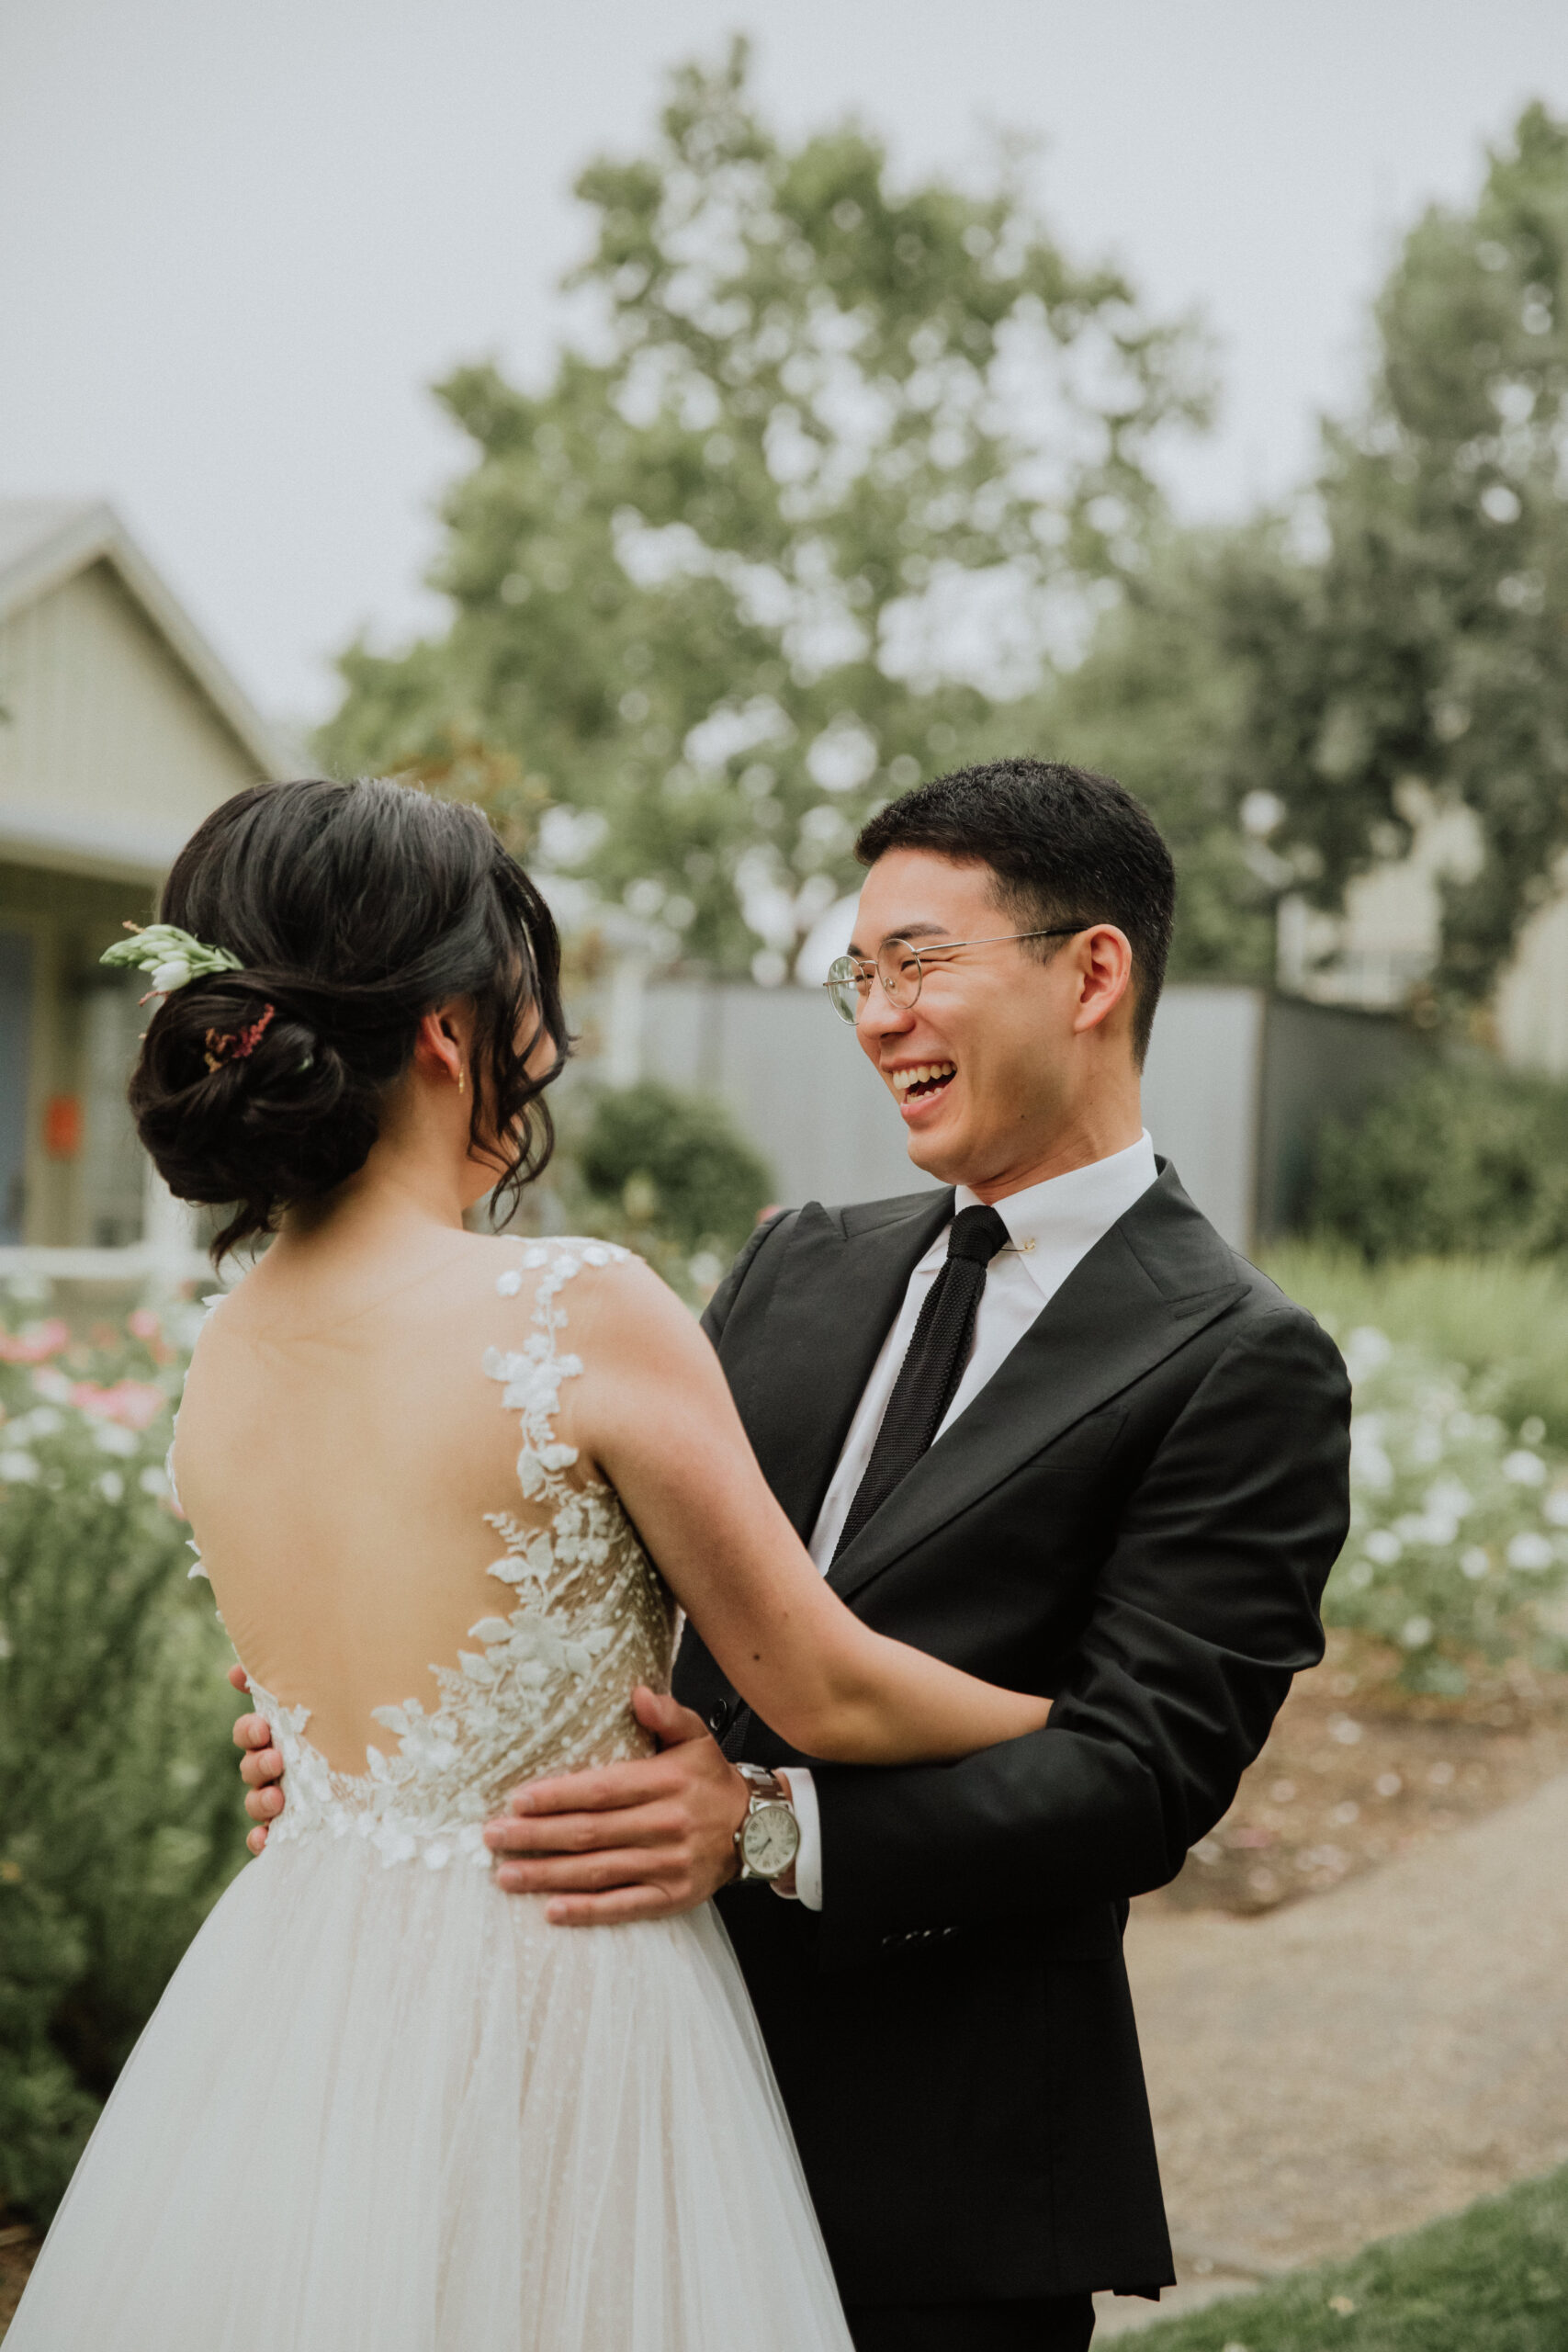 Stunning bride and groom share first look photos before their vineyard wedding ceremony